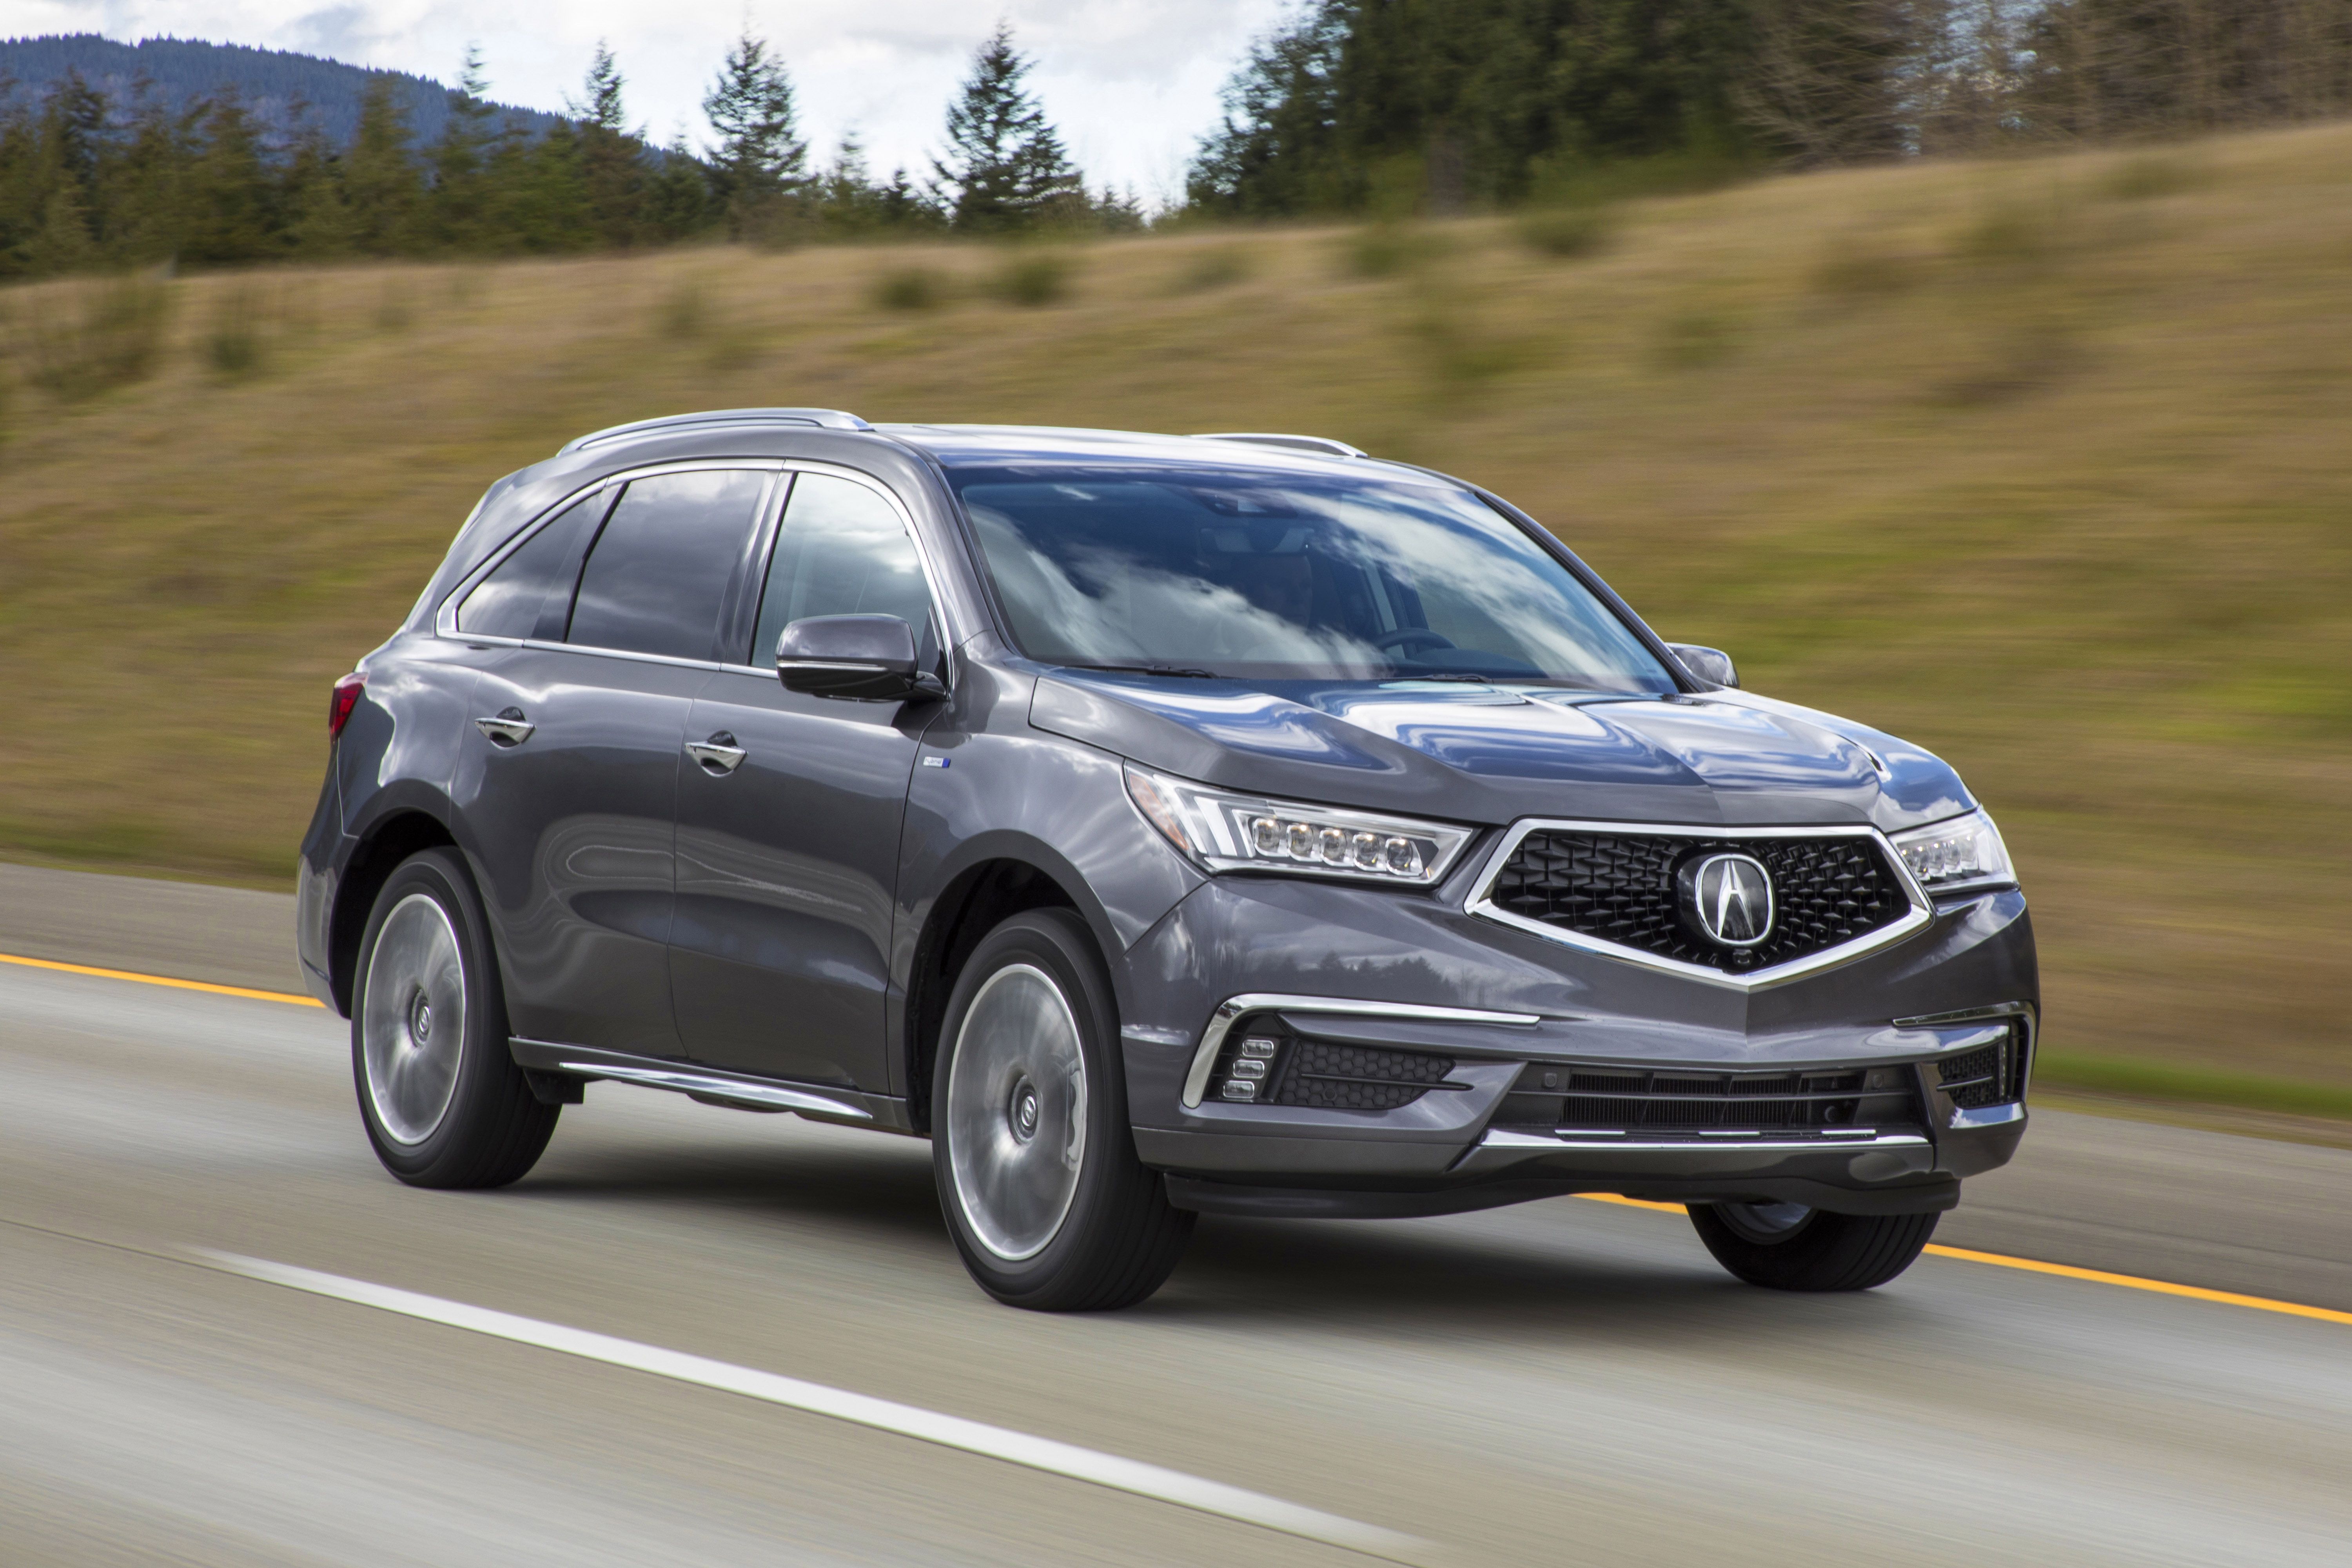 How Much Does A 2020 Acura Mdx Weight - TEWNTO